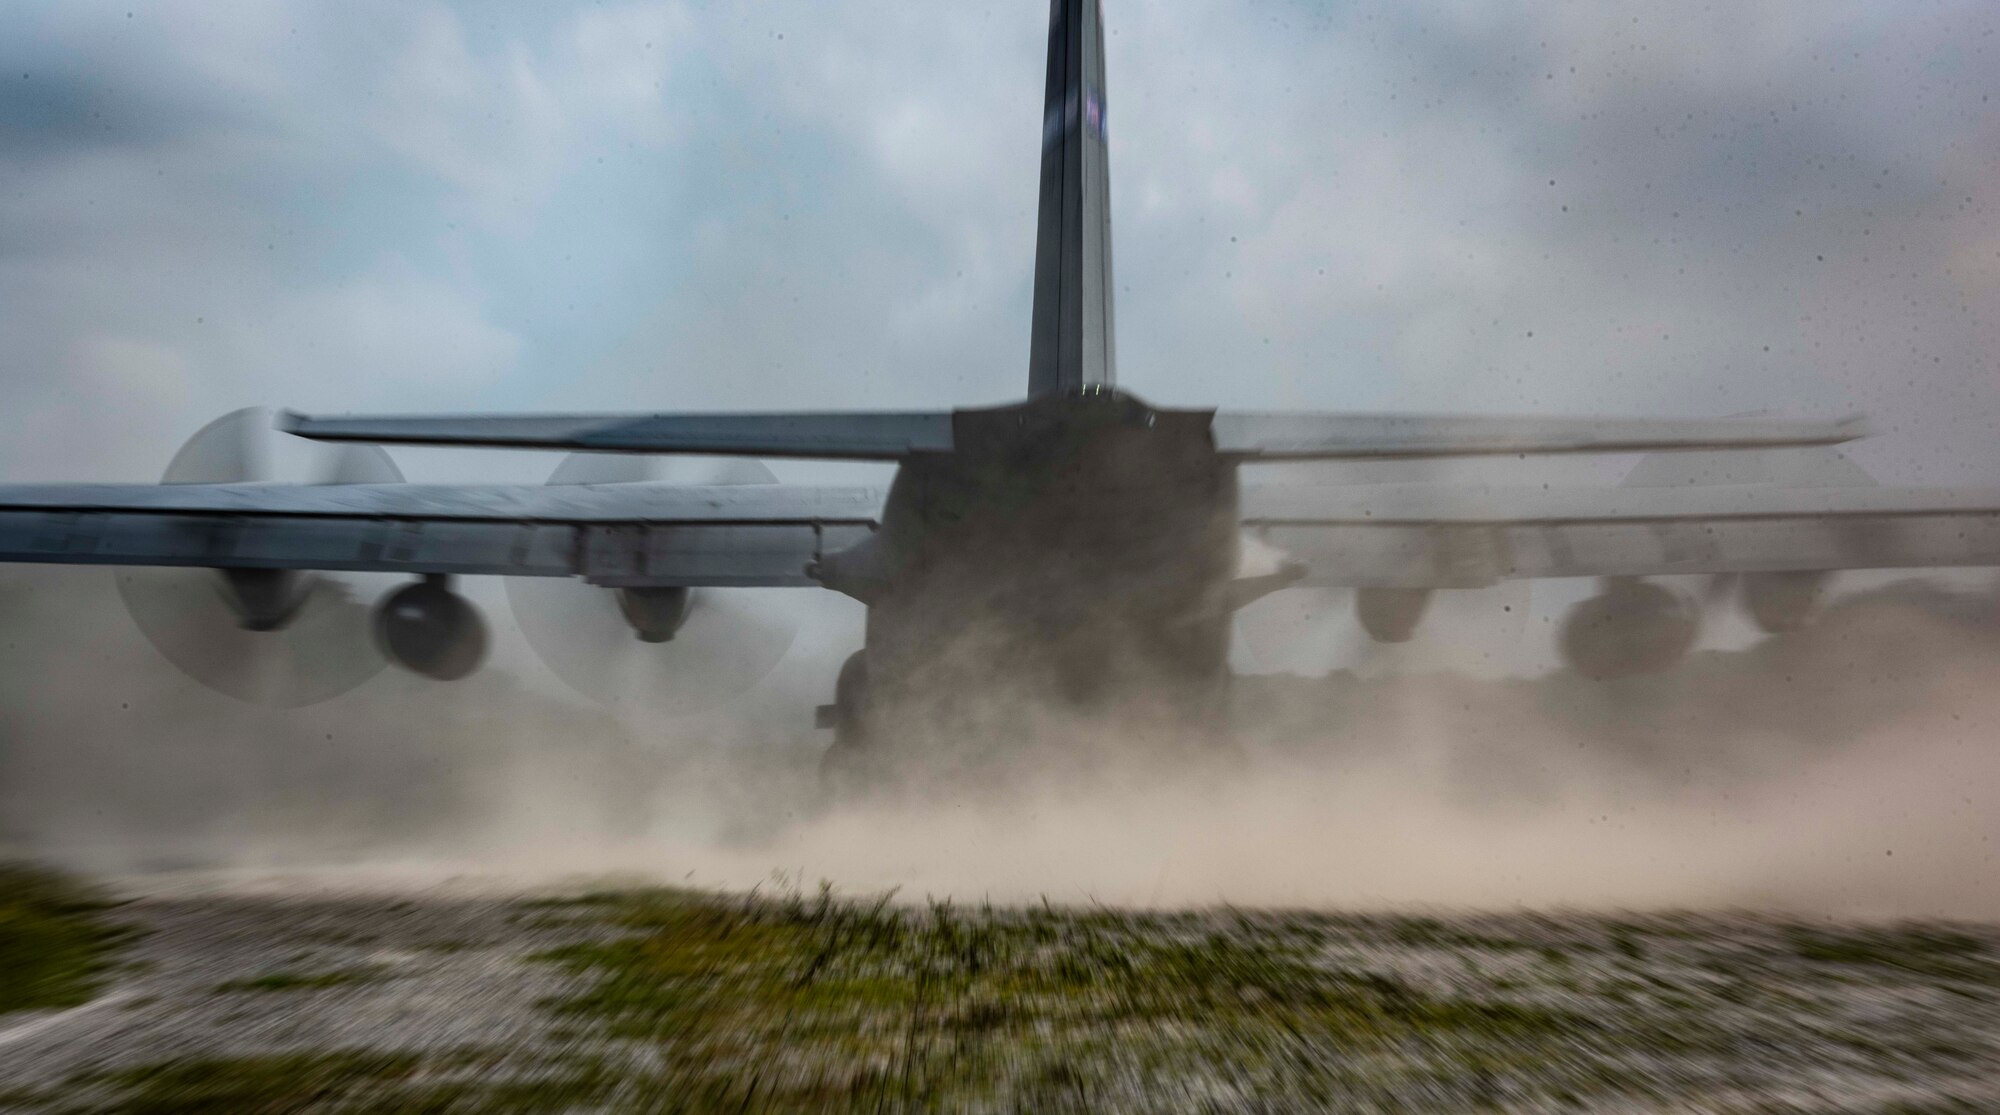 U.S. Air Force Reserve aircrew from the 908th Airlift Wing, Maxwell Air Force Base, Alabama, land a C-130H Hercules on a dirt landing zone during the distributed operations training event near Charleston, West Virginia, Aug. 25, 2020. The training event tested aircrew on their tactical combat airlift skills such as cargo airdrop, formation flights, and personnel delivery in a contested environment. There were a total of eight aircraft from various Reserve and Guard units supporting the training effort, enabling strategic depth and readiness for the force.